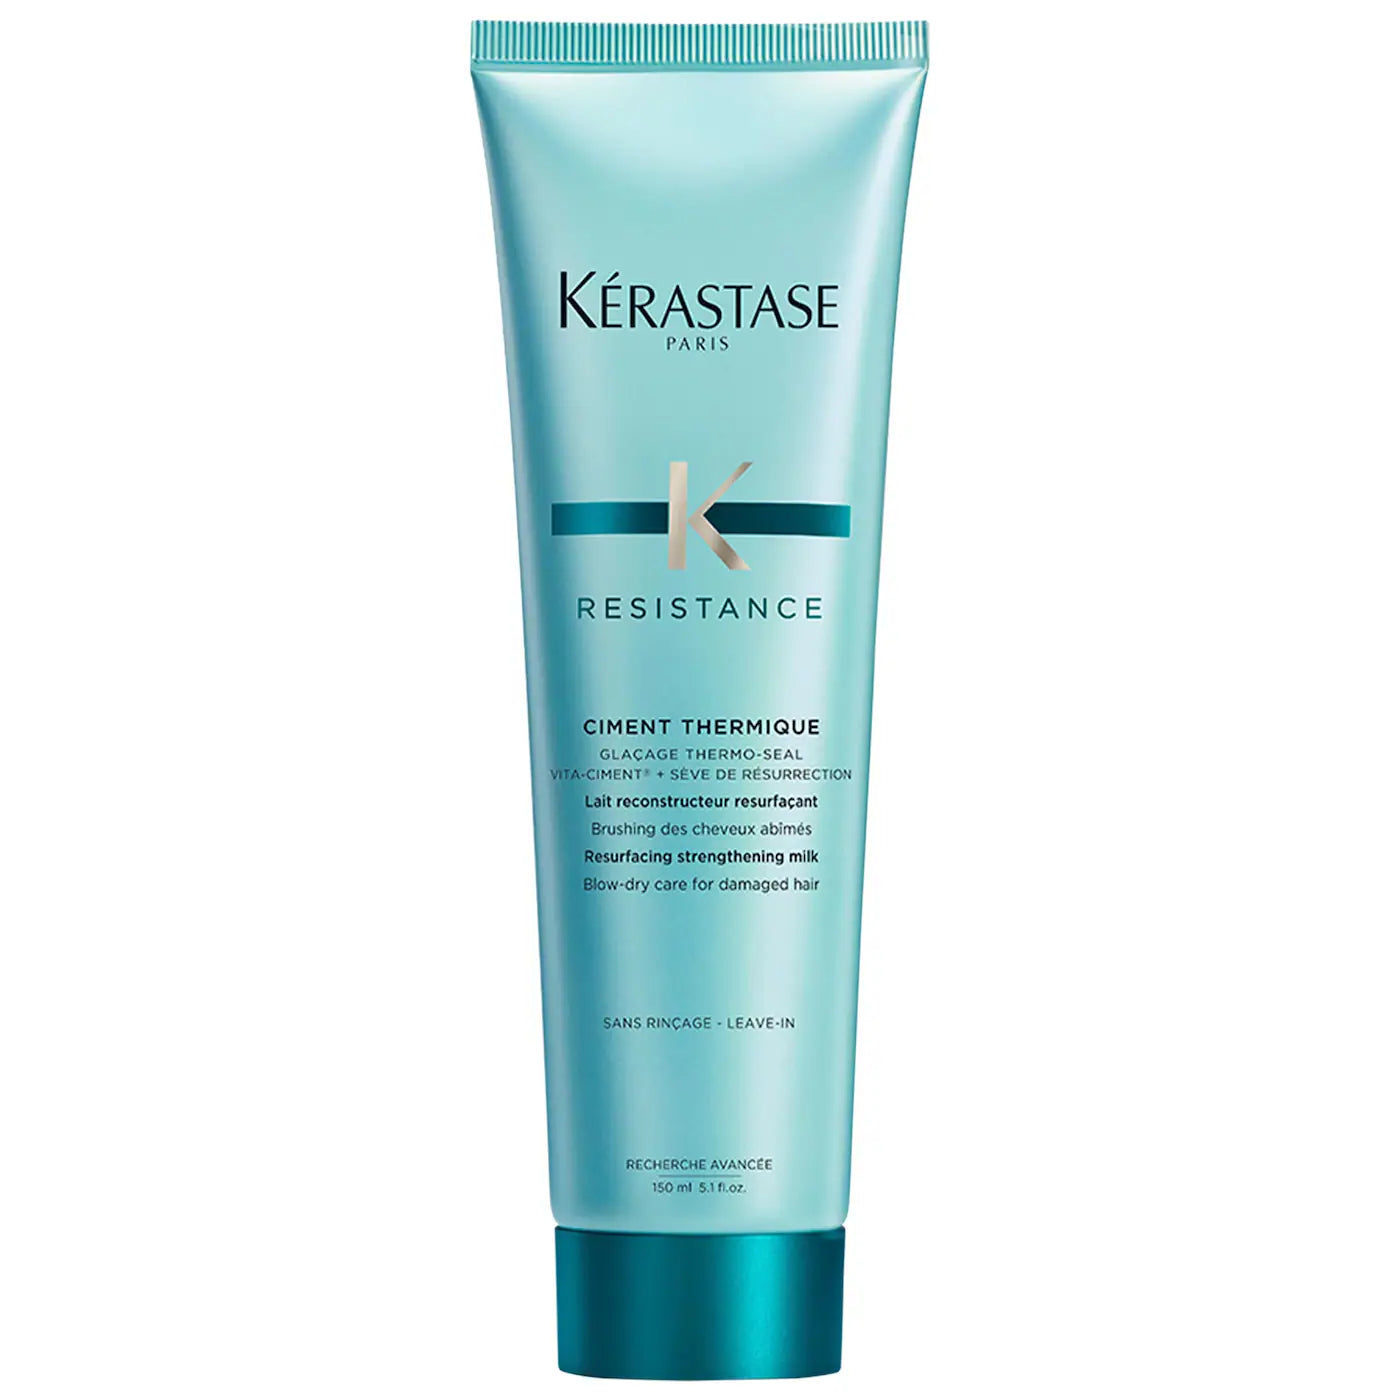 Resistance Heat Protecting Leave In Treatment for Damaged Hair Trial Size - 30 ml